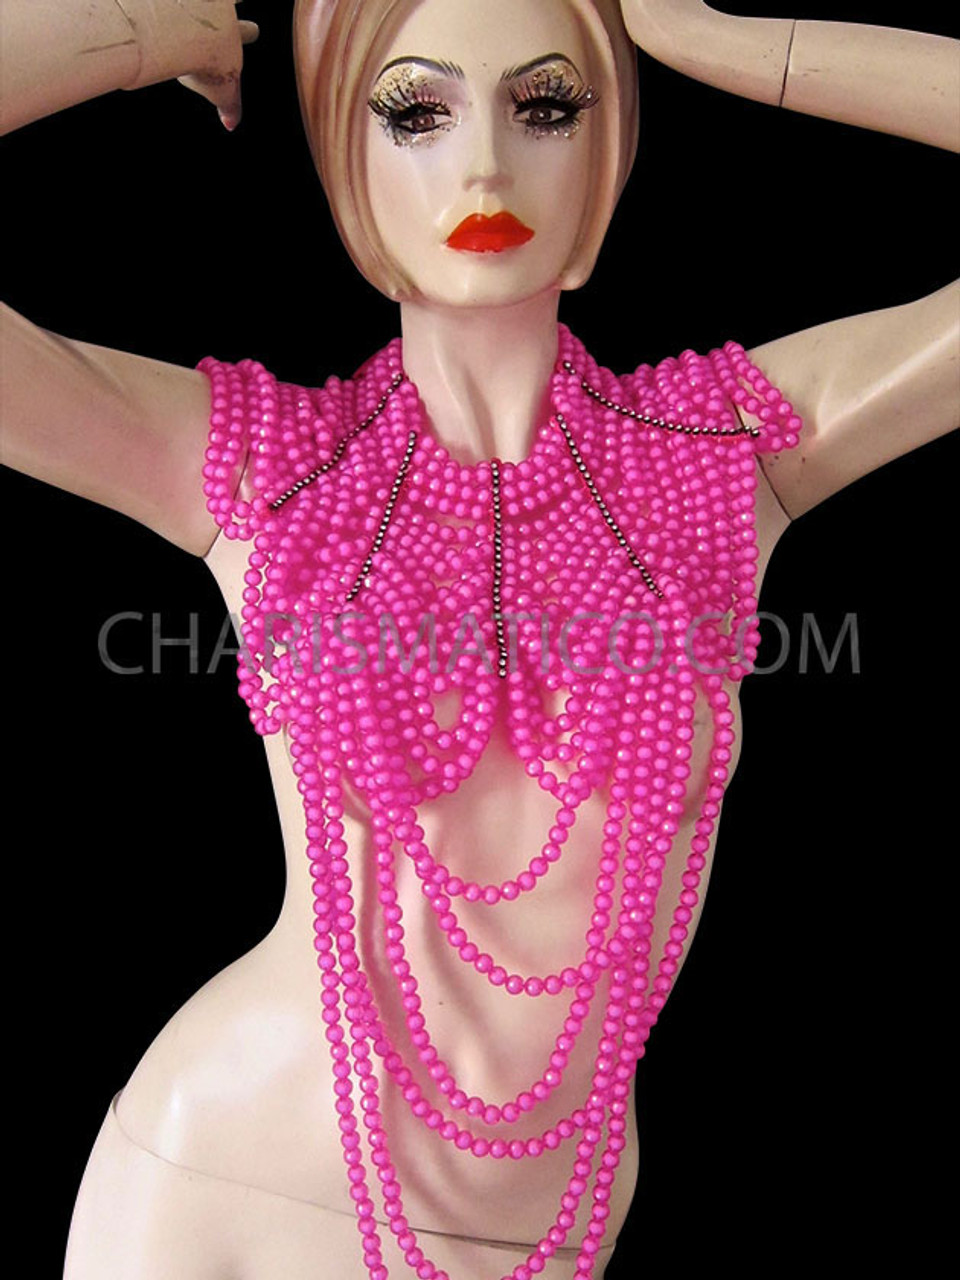 Statement Necklace Exotic Tribal Hot Pink Beads Waziri Dome Pendant Jewelry Haute Couture Socialite